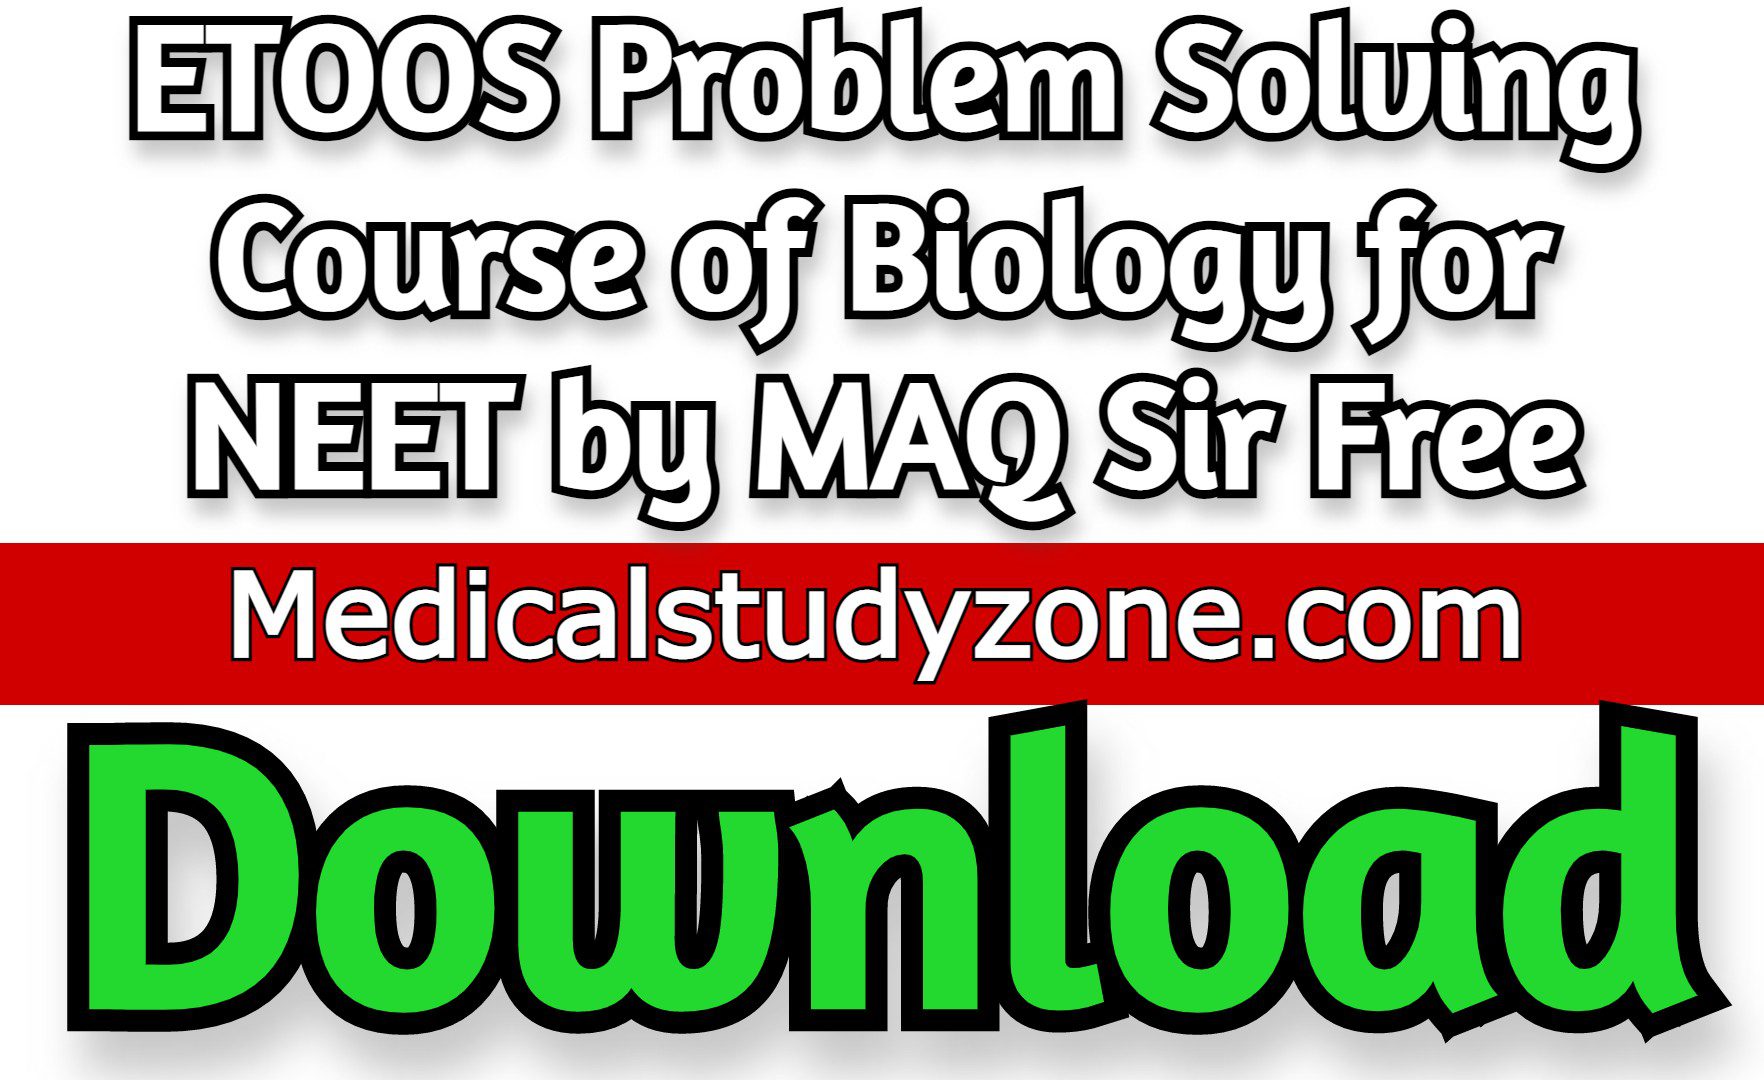 Download ETOOS Problem Solving Course of Biology for NEET by MAQ Sir Free